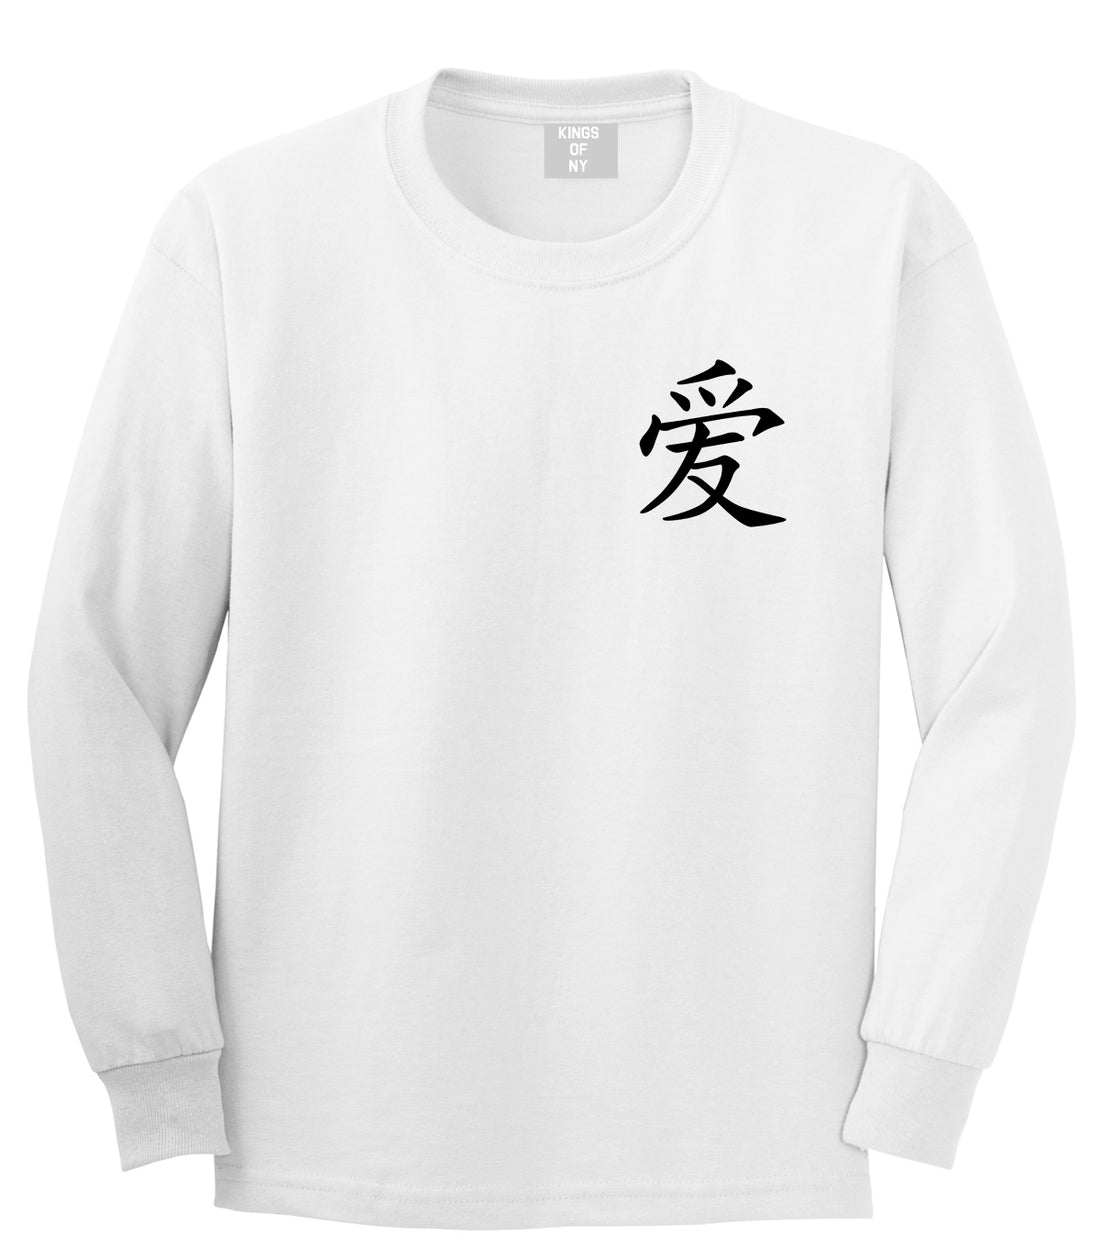 Chinese Symbol For Love Chest White Long Sleeve T-Shirt by Kings Of NY